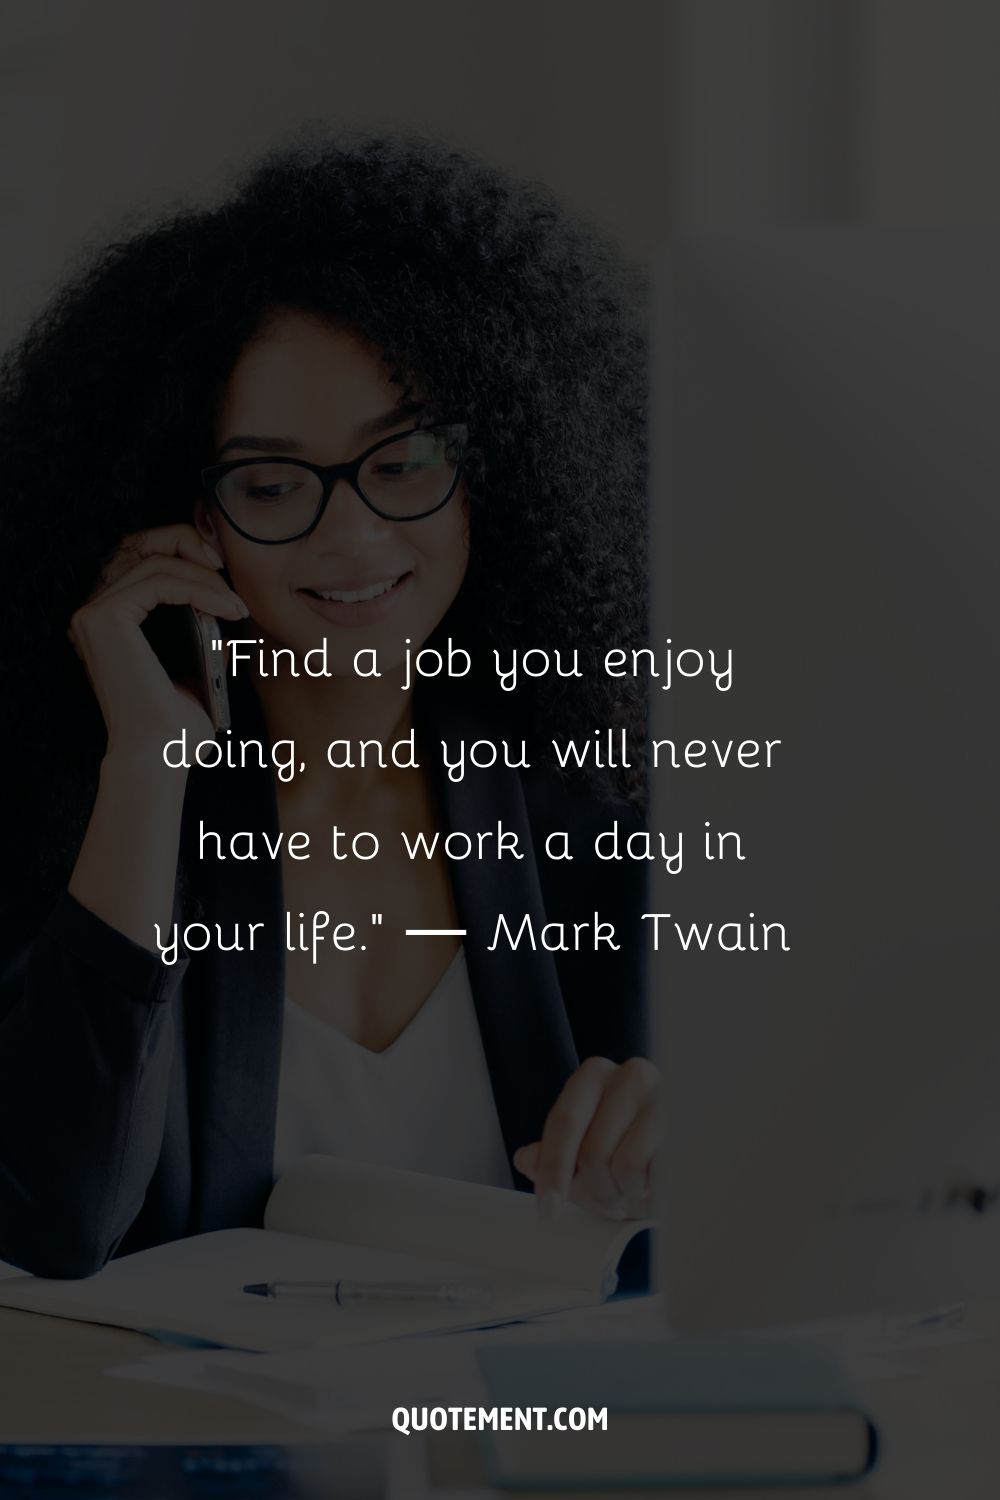 “Find a job you enjoy doing, and you will never have to work a day in your life.” ― Mark Twain